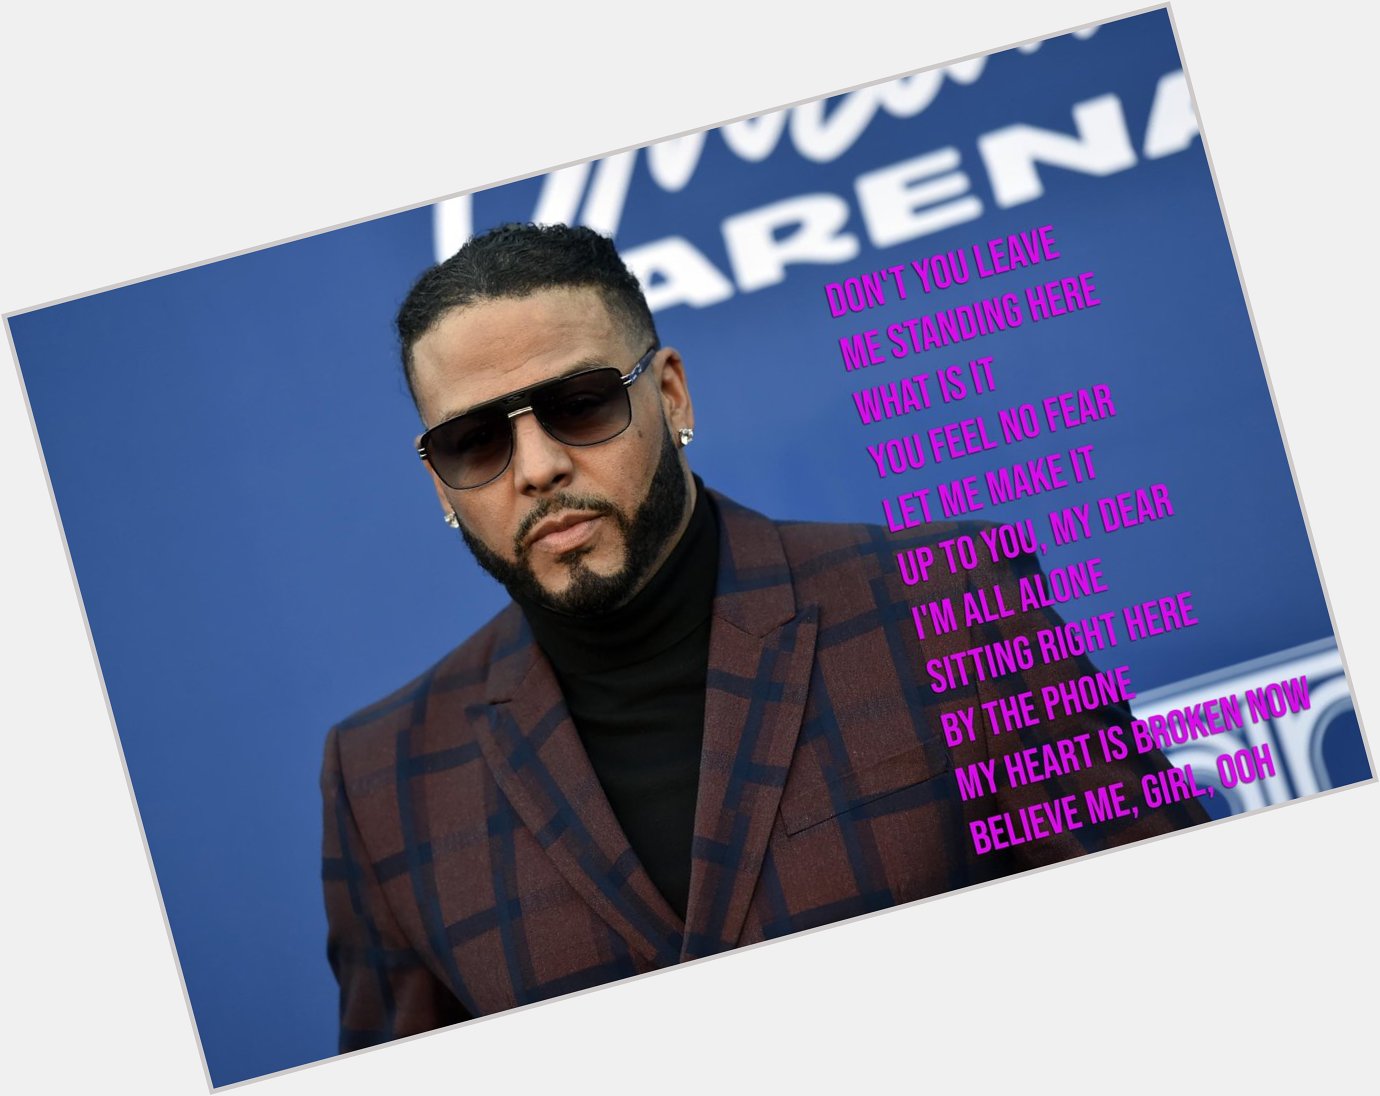  Off On Your Own (Girl) by Al B. Sure!, who celebrates his birthday today. Happy Birthday! 